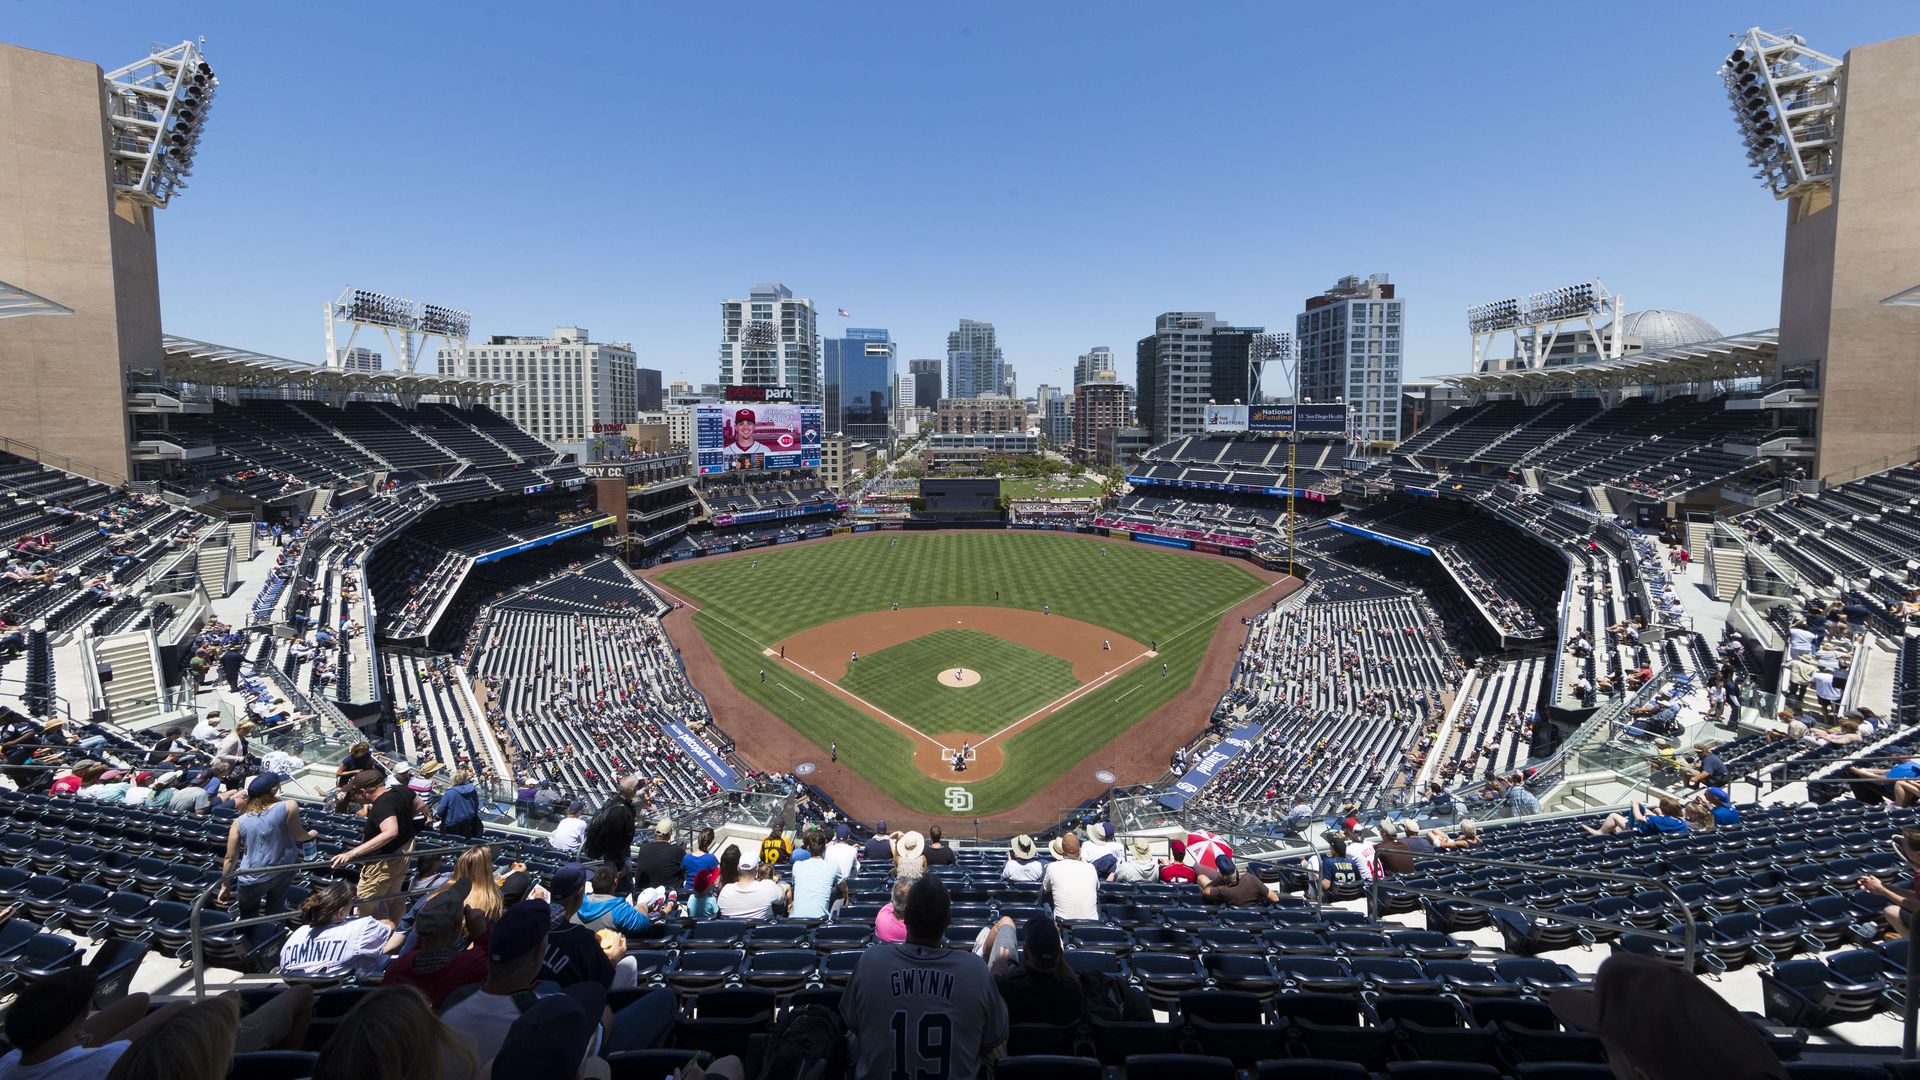 View of the interior of Petco Park during a MLB regular season game last year